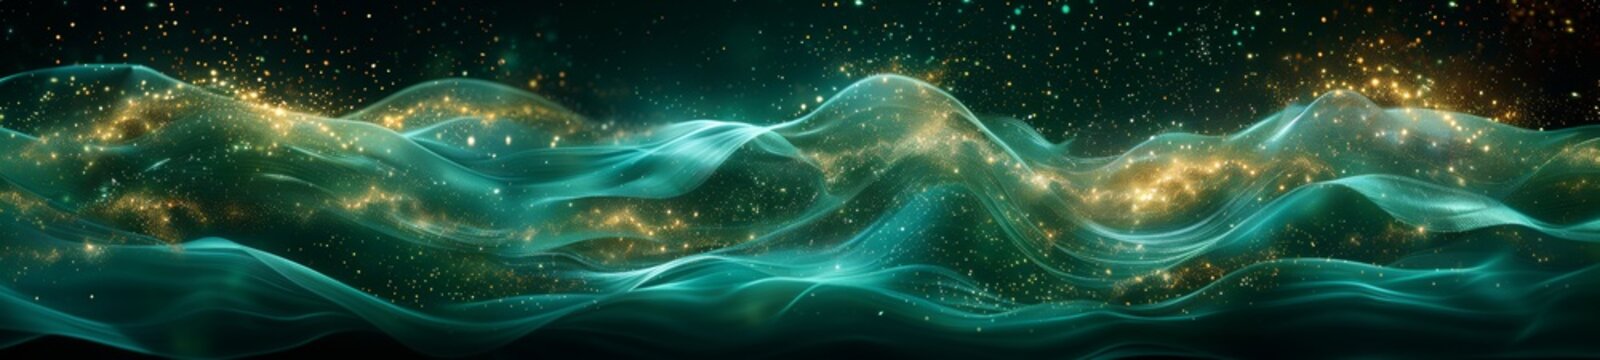 Wave background. The soft flow of yellow and green waves creates a mesmerizing and magical visual delight.